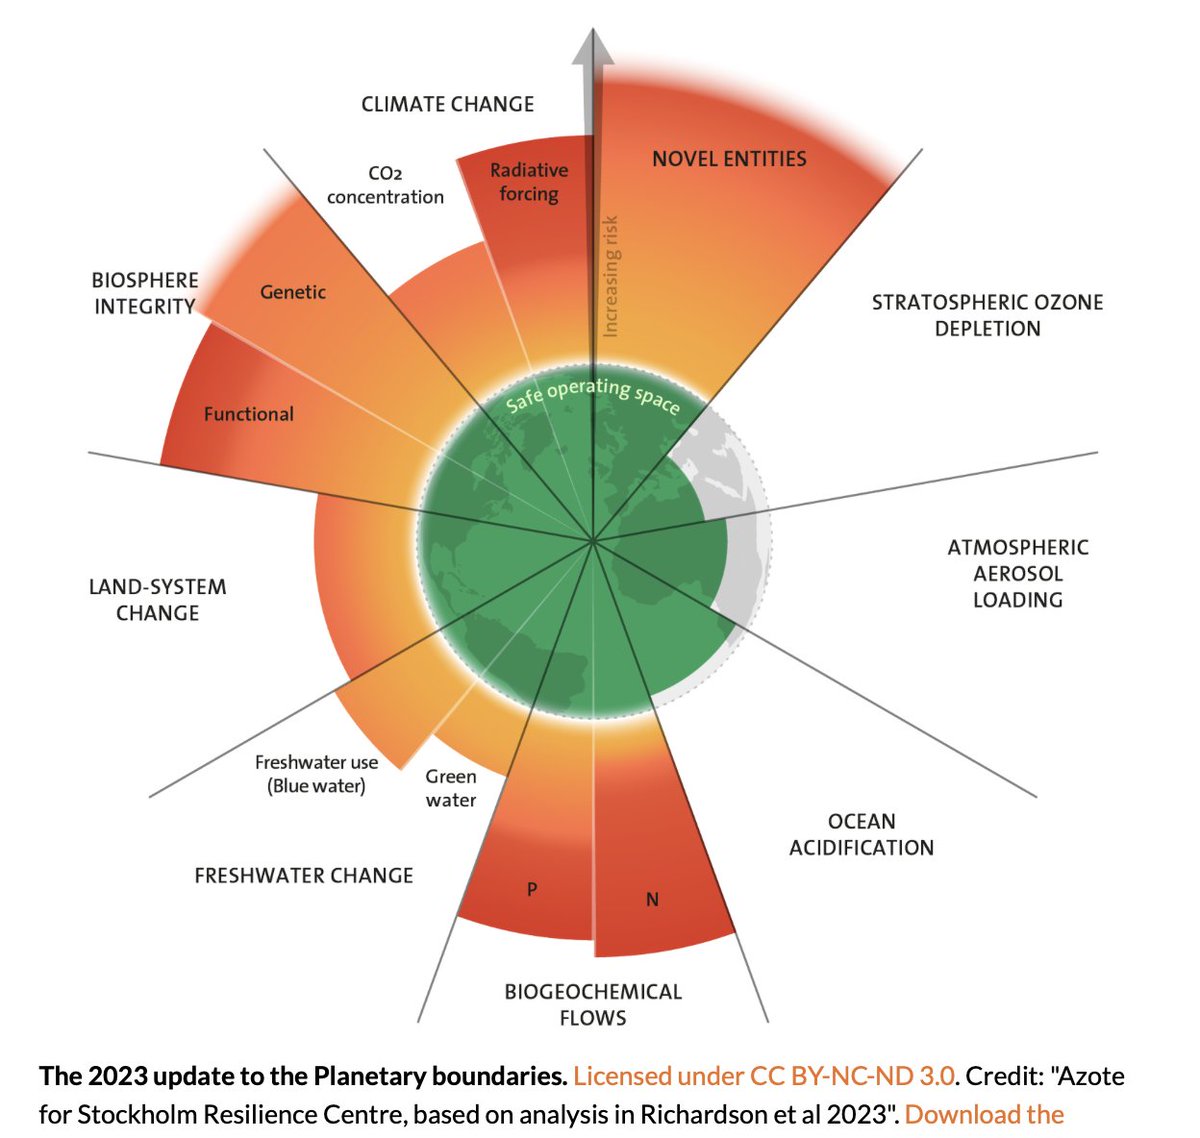 Today I'm sharing the Planetary Boundaries framework first proposed in 2009 & revised since then. These 9 process regulate the resilience of our planet. In 2023, 6 of 9 safe boundaries have been crossed. For more info on human impacts on the planet: science.org/doi/10.1126/sc…